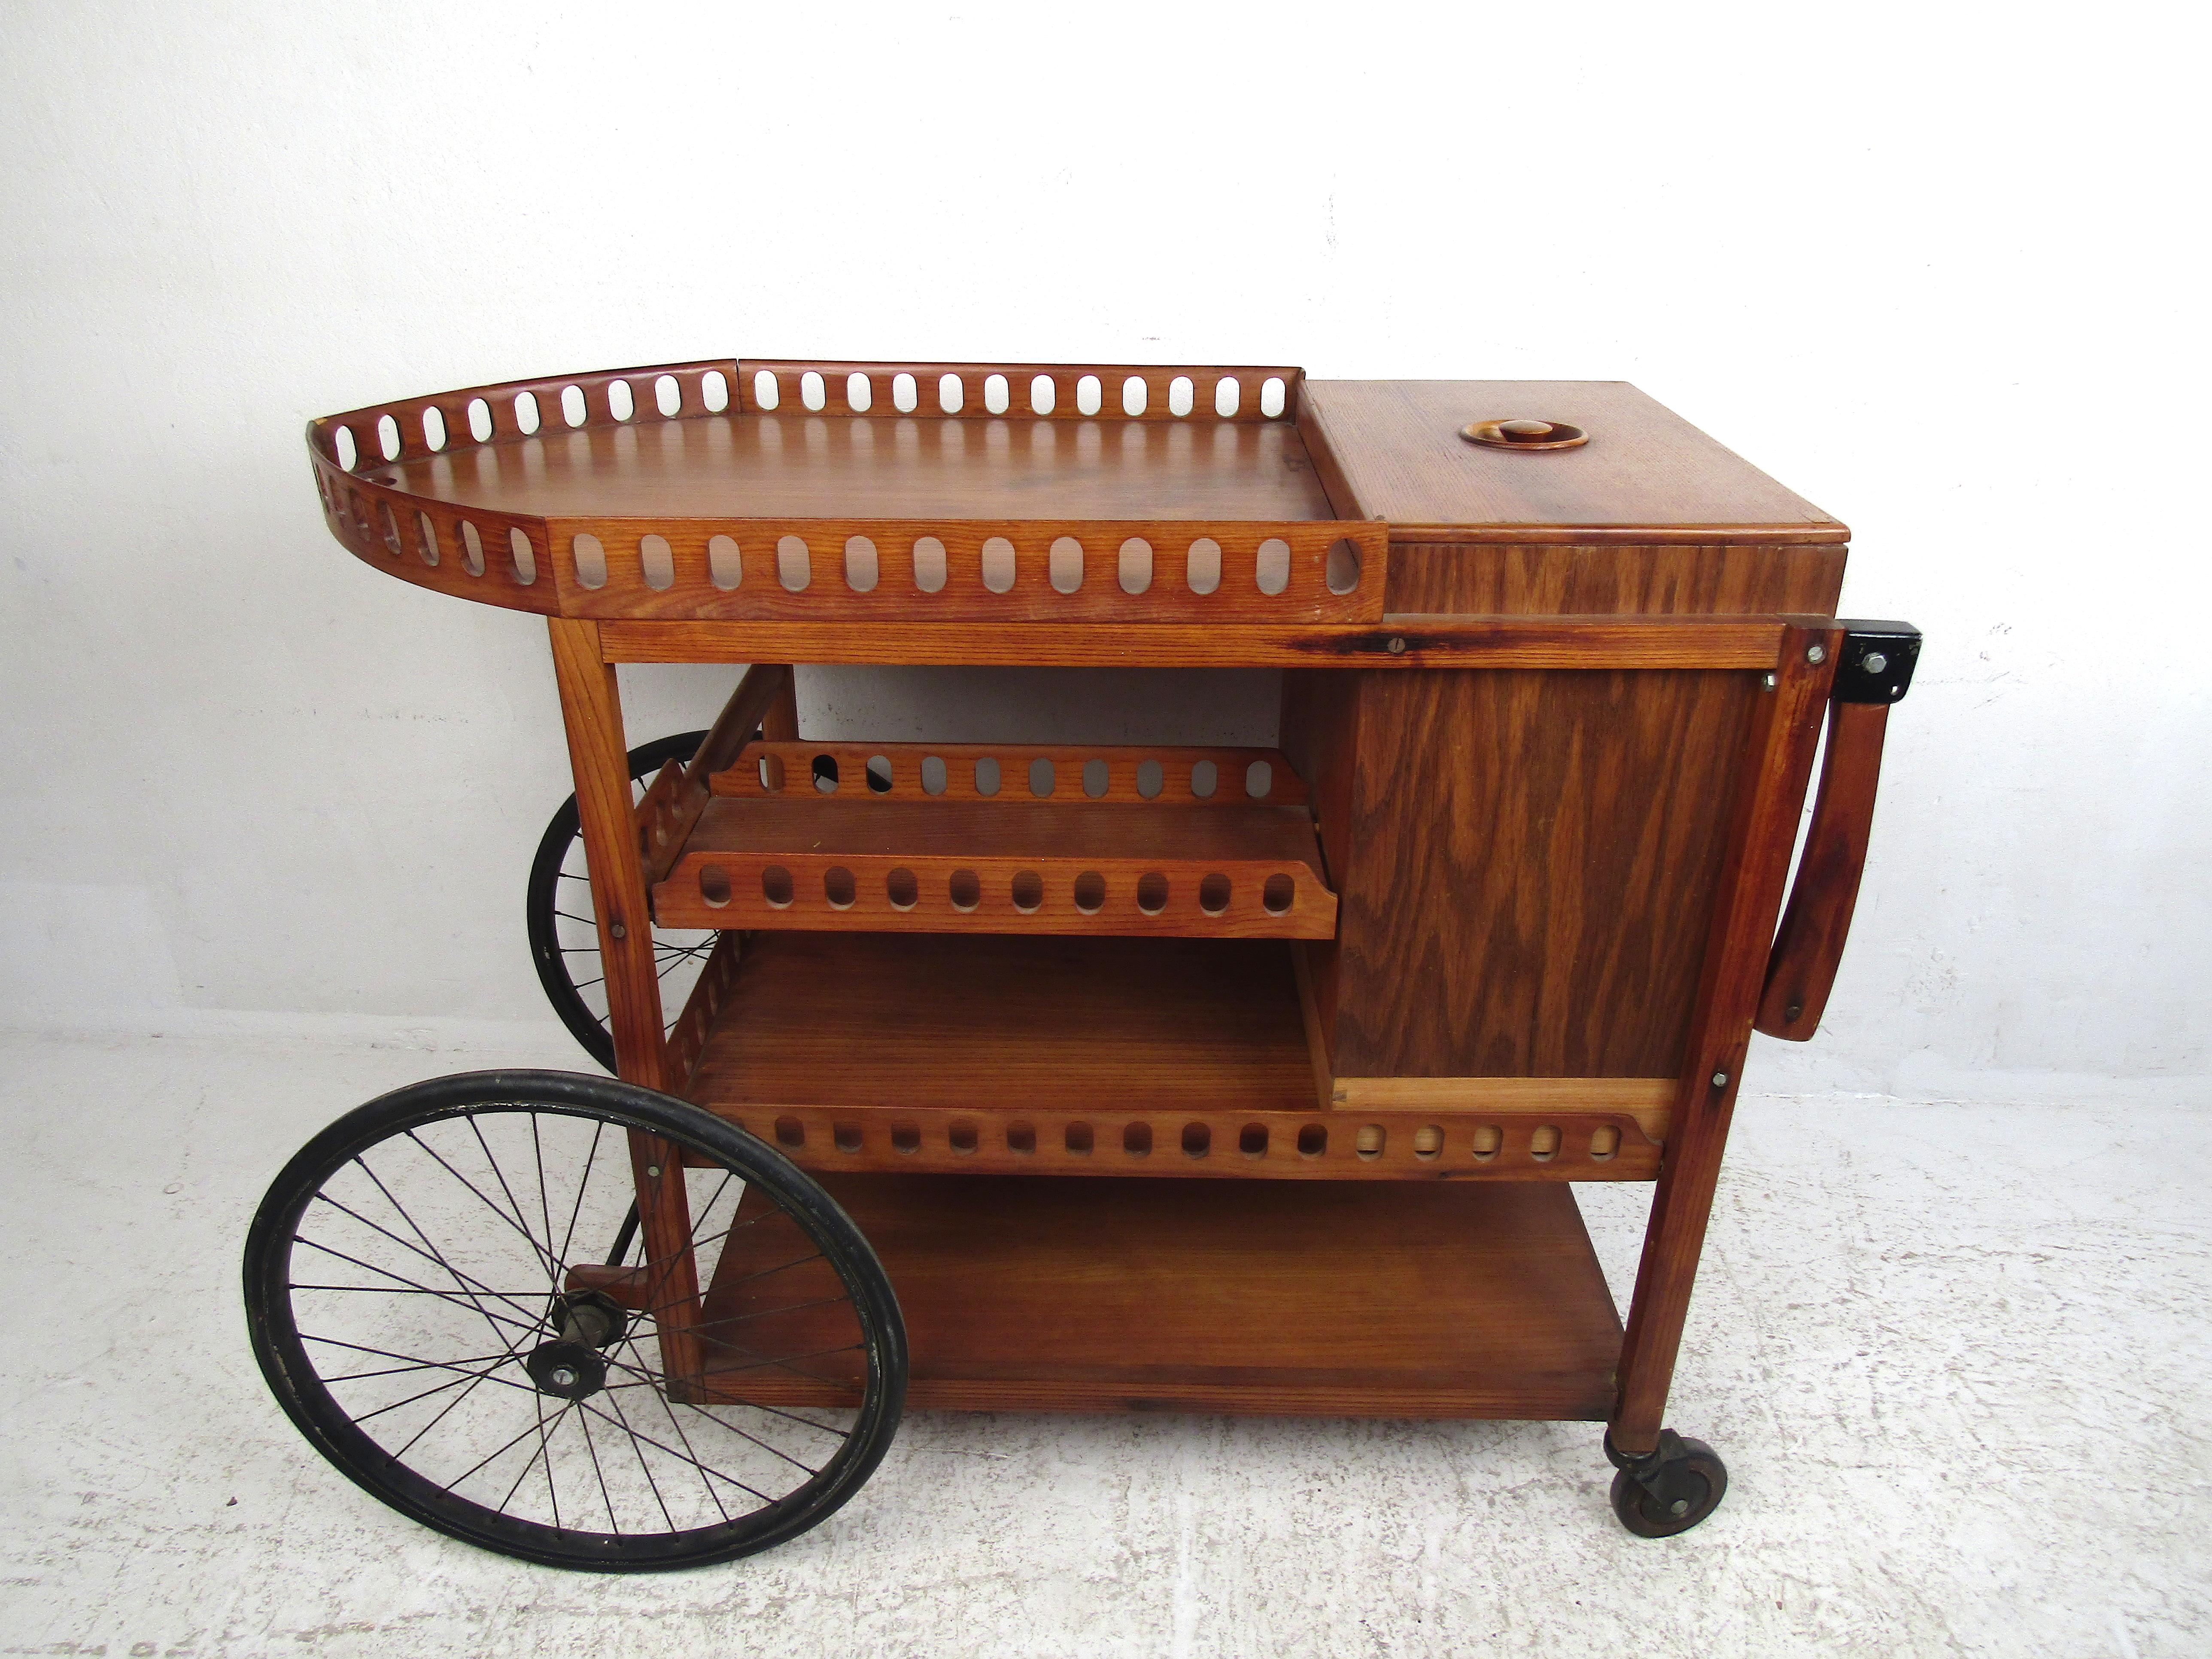 Very unusual serving cart with four tiers of storage space. Nice accents along the sides of each tier. A concealed drawer extends from the back of the piece. Easily maneuverable. Serve your guests in style with this interesting bar-cart. Please